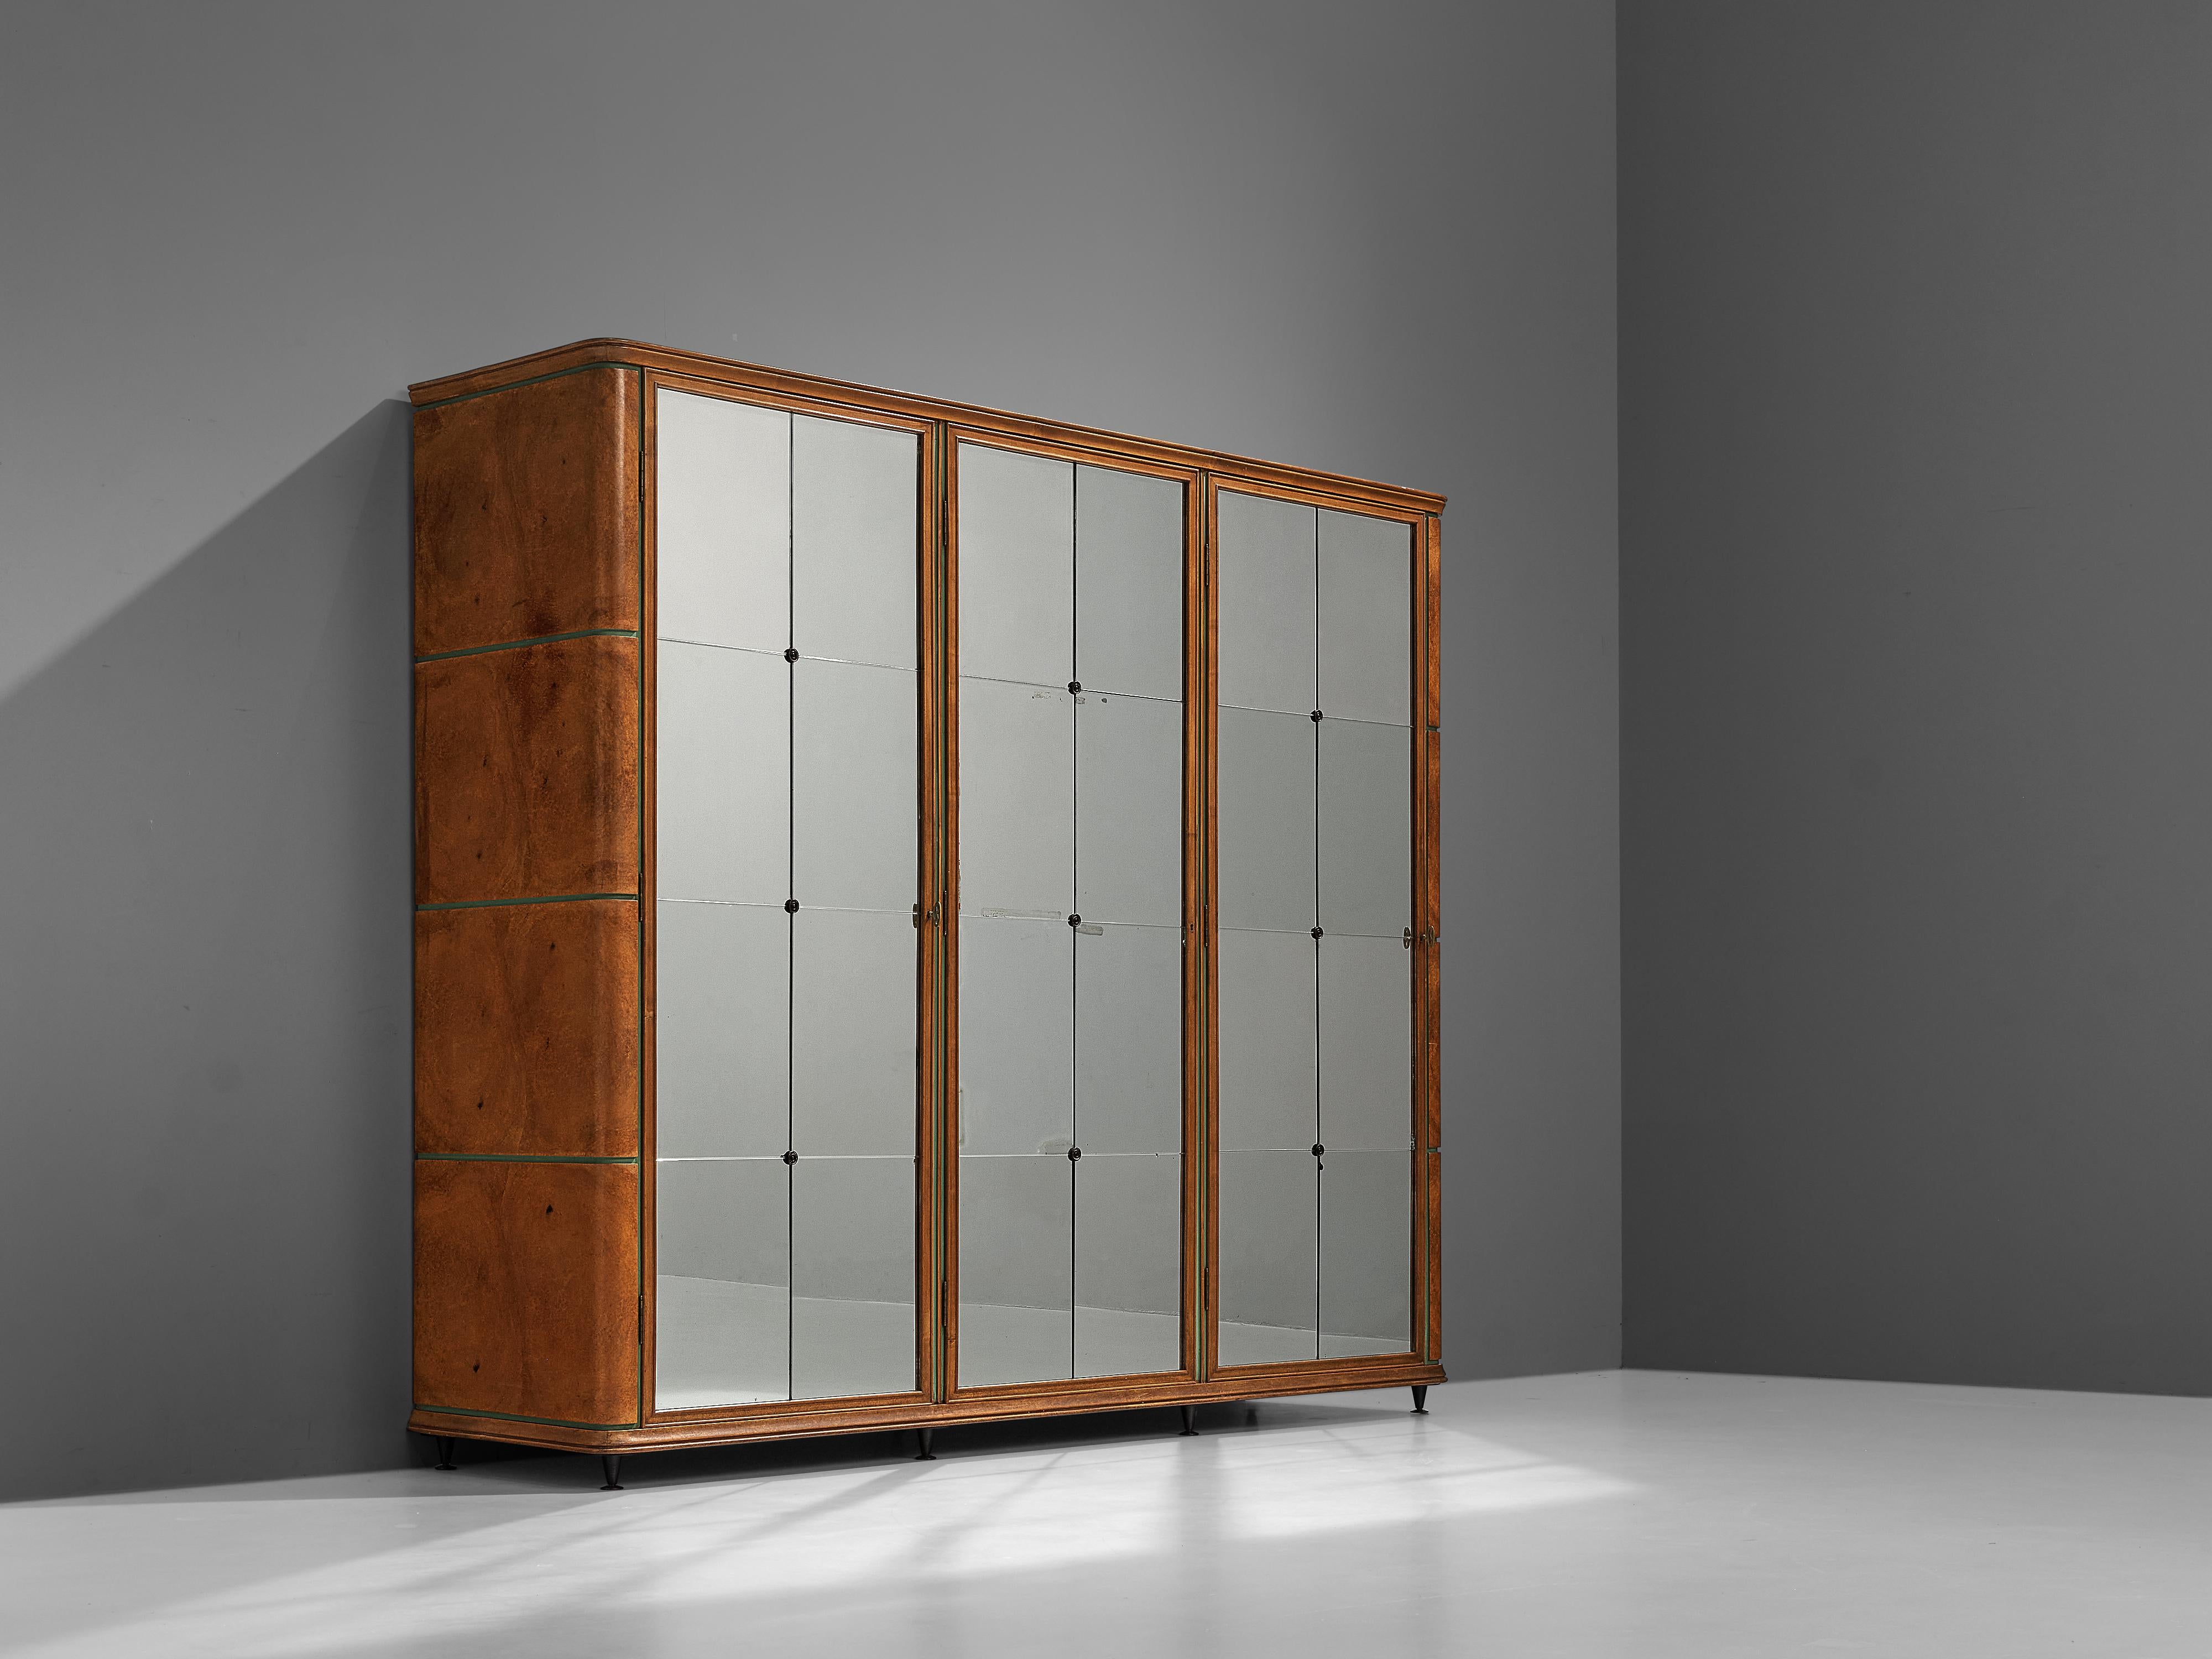 Italian wardrobe, oak, brass, mirrors, 1950s

Luxurious wardrobe in oak with a classic and sophisticated look. The three doors are designed with elegant mirrored doors that have detailed brass elements. These patinated mirrors have a lined surface